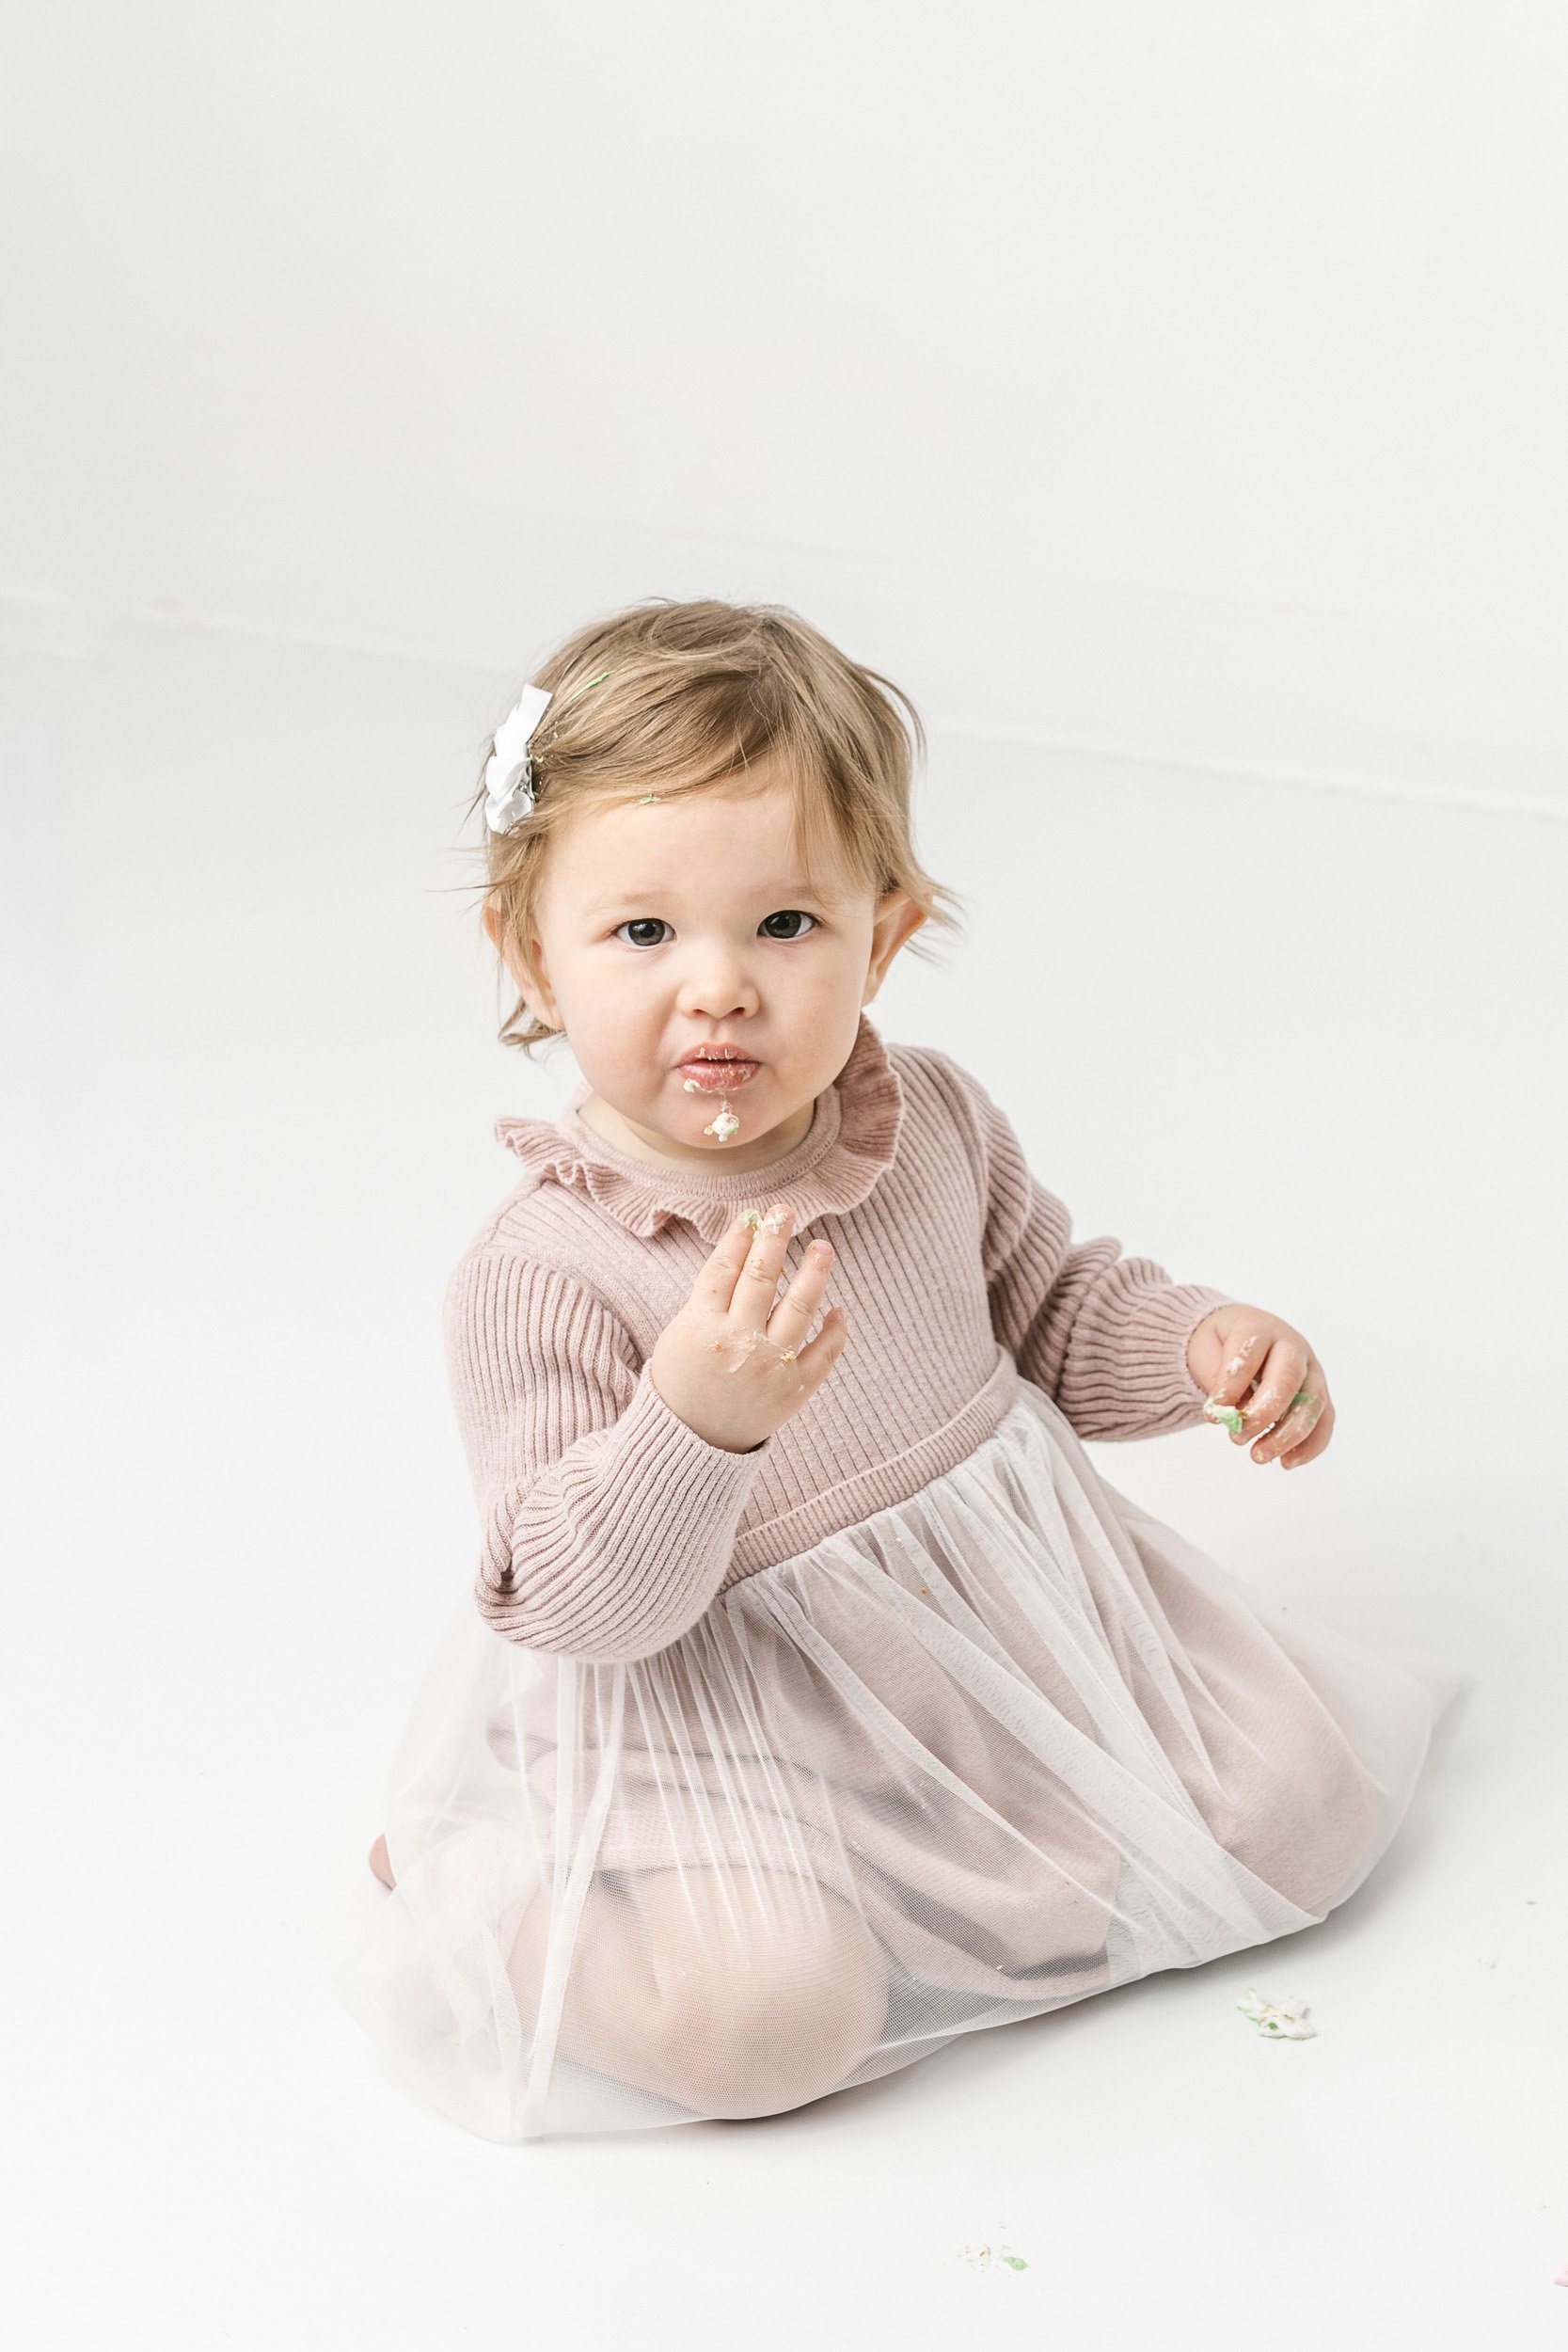  Nicole Hawkins Photography captures a baby girl tasting birthday cake in a white bright studio. studio smash cake #NicoleHawkinsPhotography #NicoleHawkinsBabies #studiochildren #firstbirthday #studiophotography #girlsbirthdayportraits 